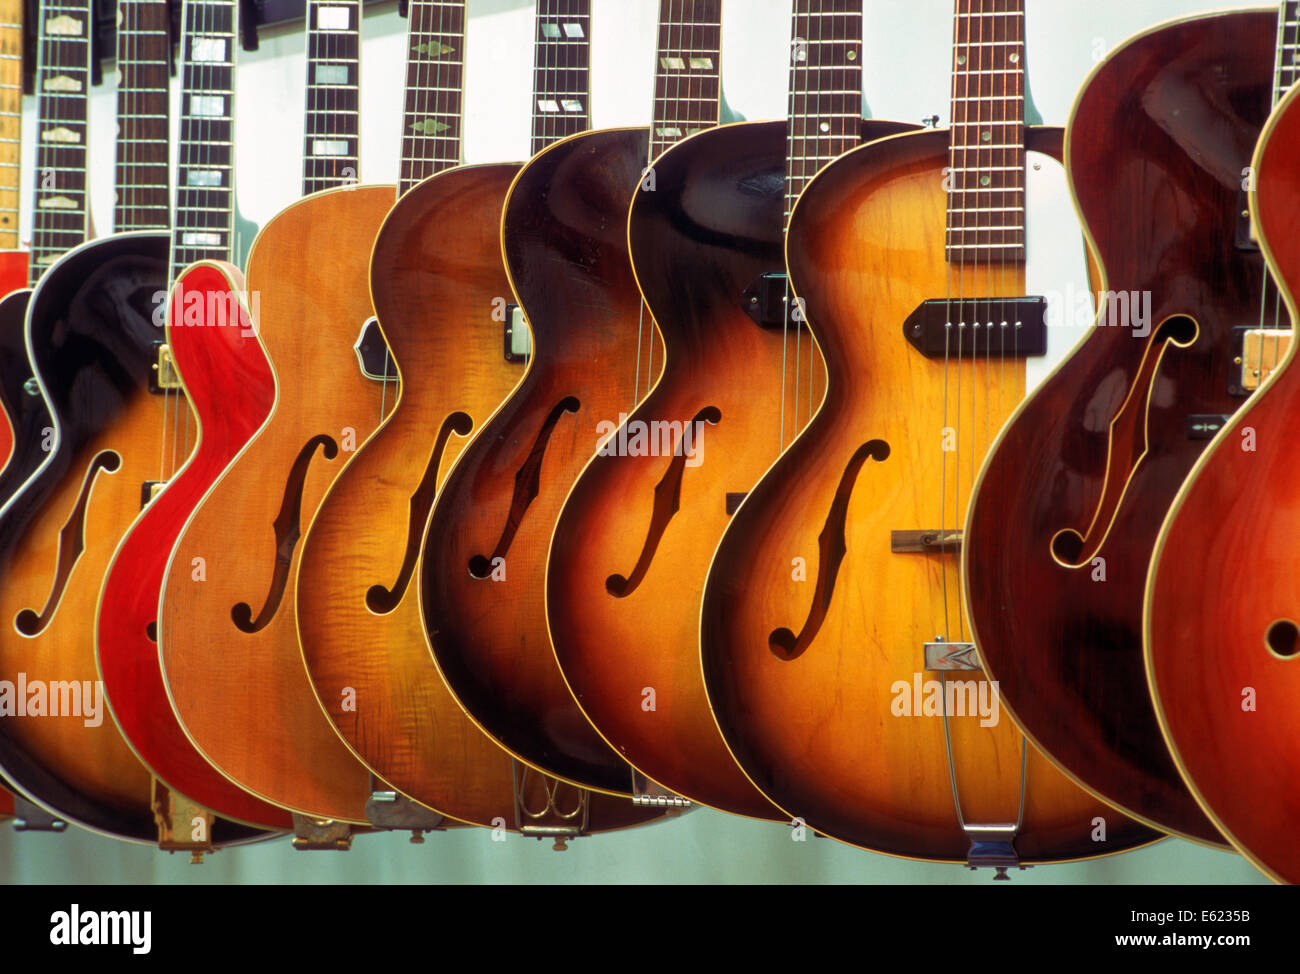 Made in America.  Grunn Guitars shop in Nashville Tennessee selling musical instruments Stock Photo